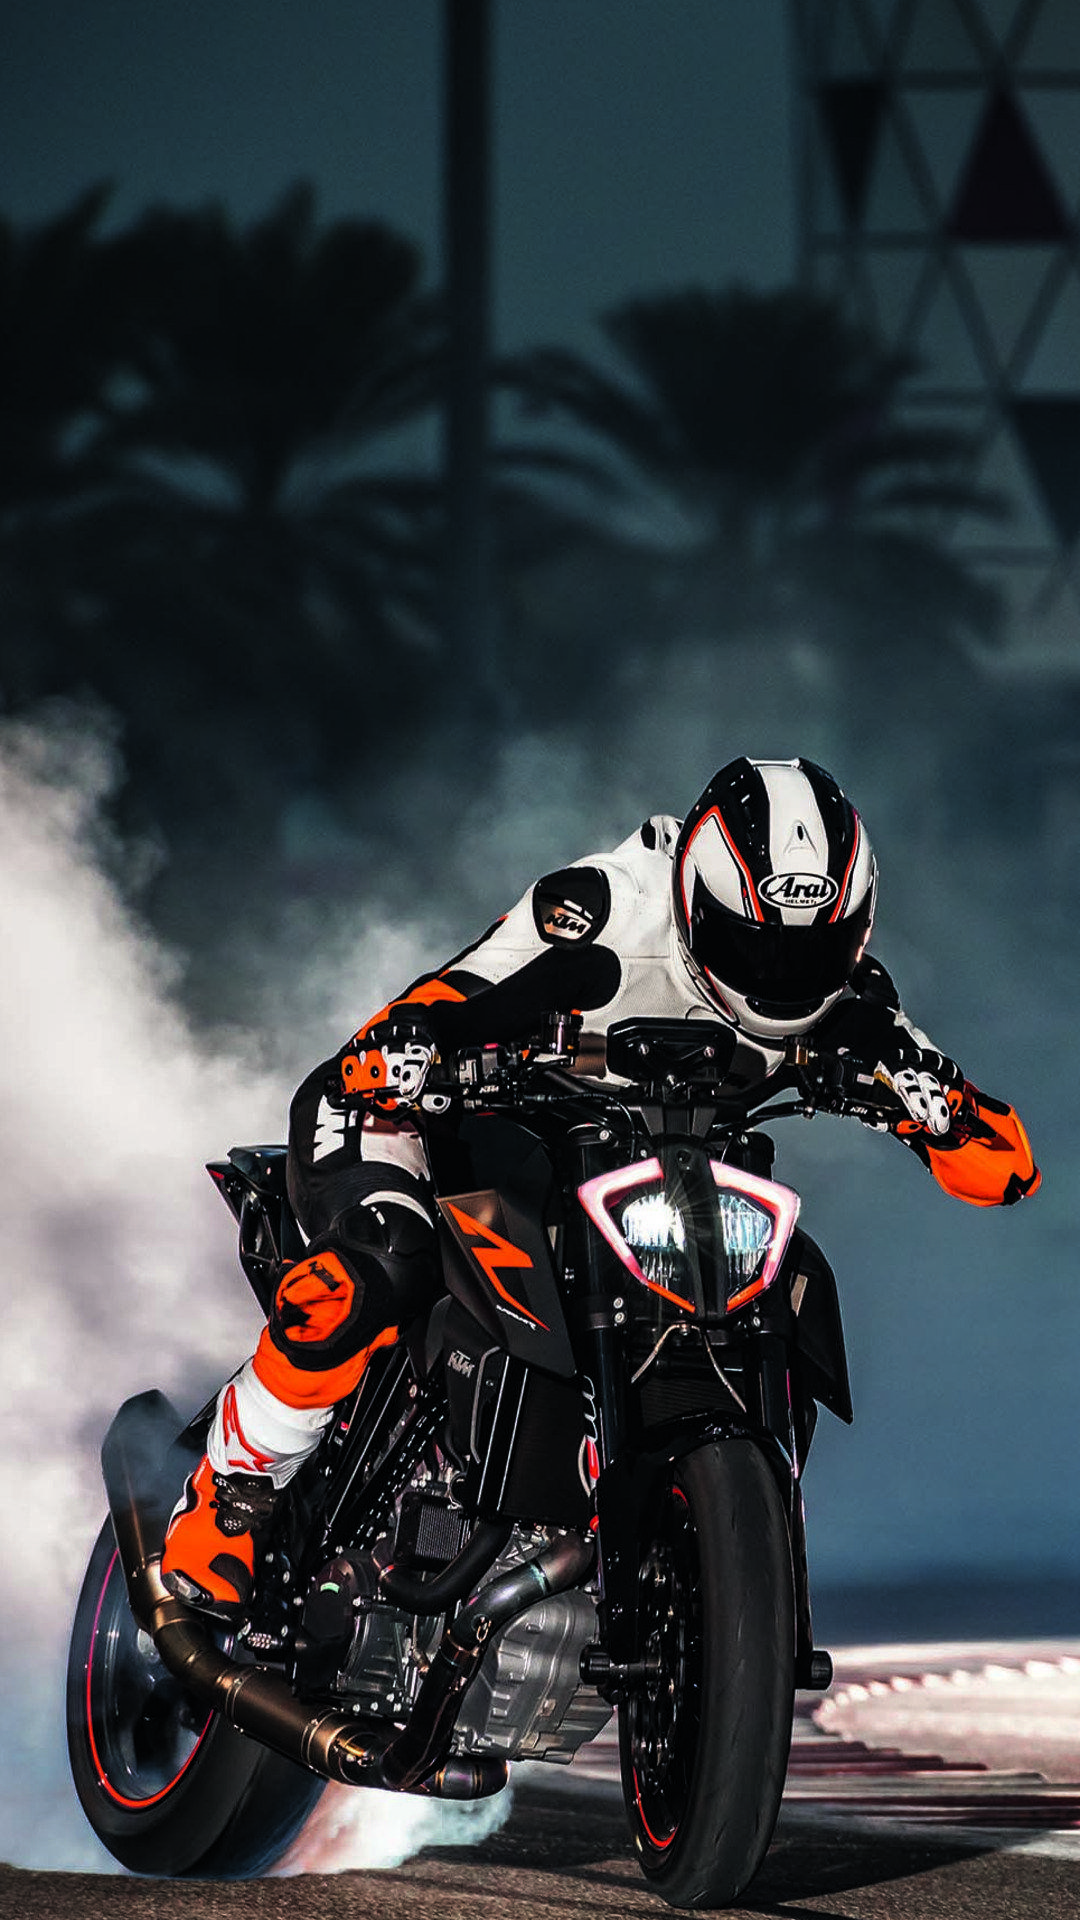 KTM 1290 Super Duke R quality htc one wallpaper and abstract background designed by the best and creative artists in the. Ktm, Duke bike, Duke motorcycle